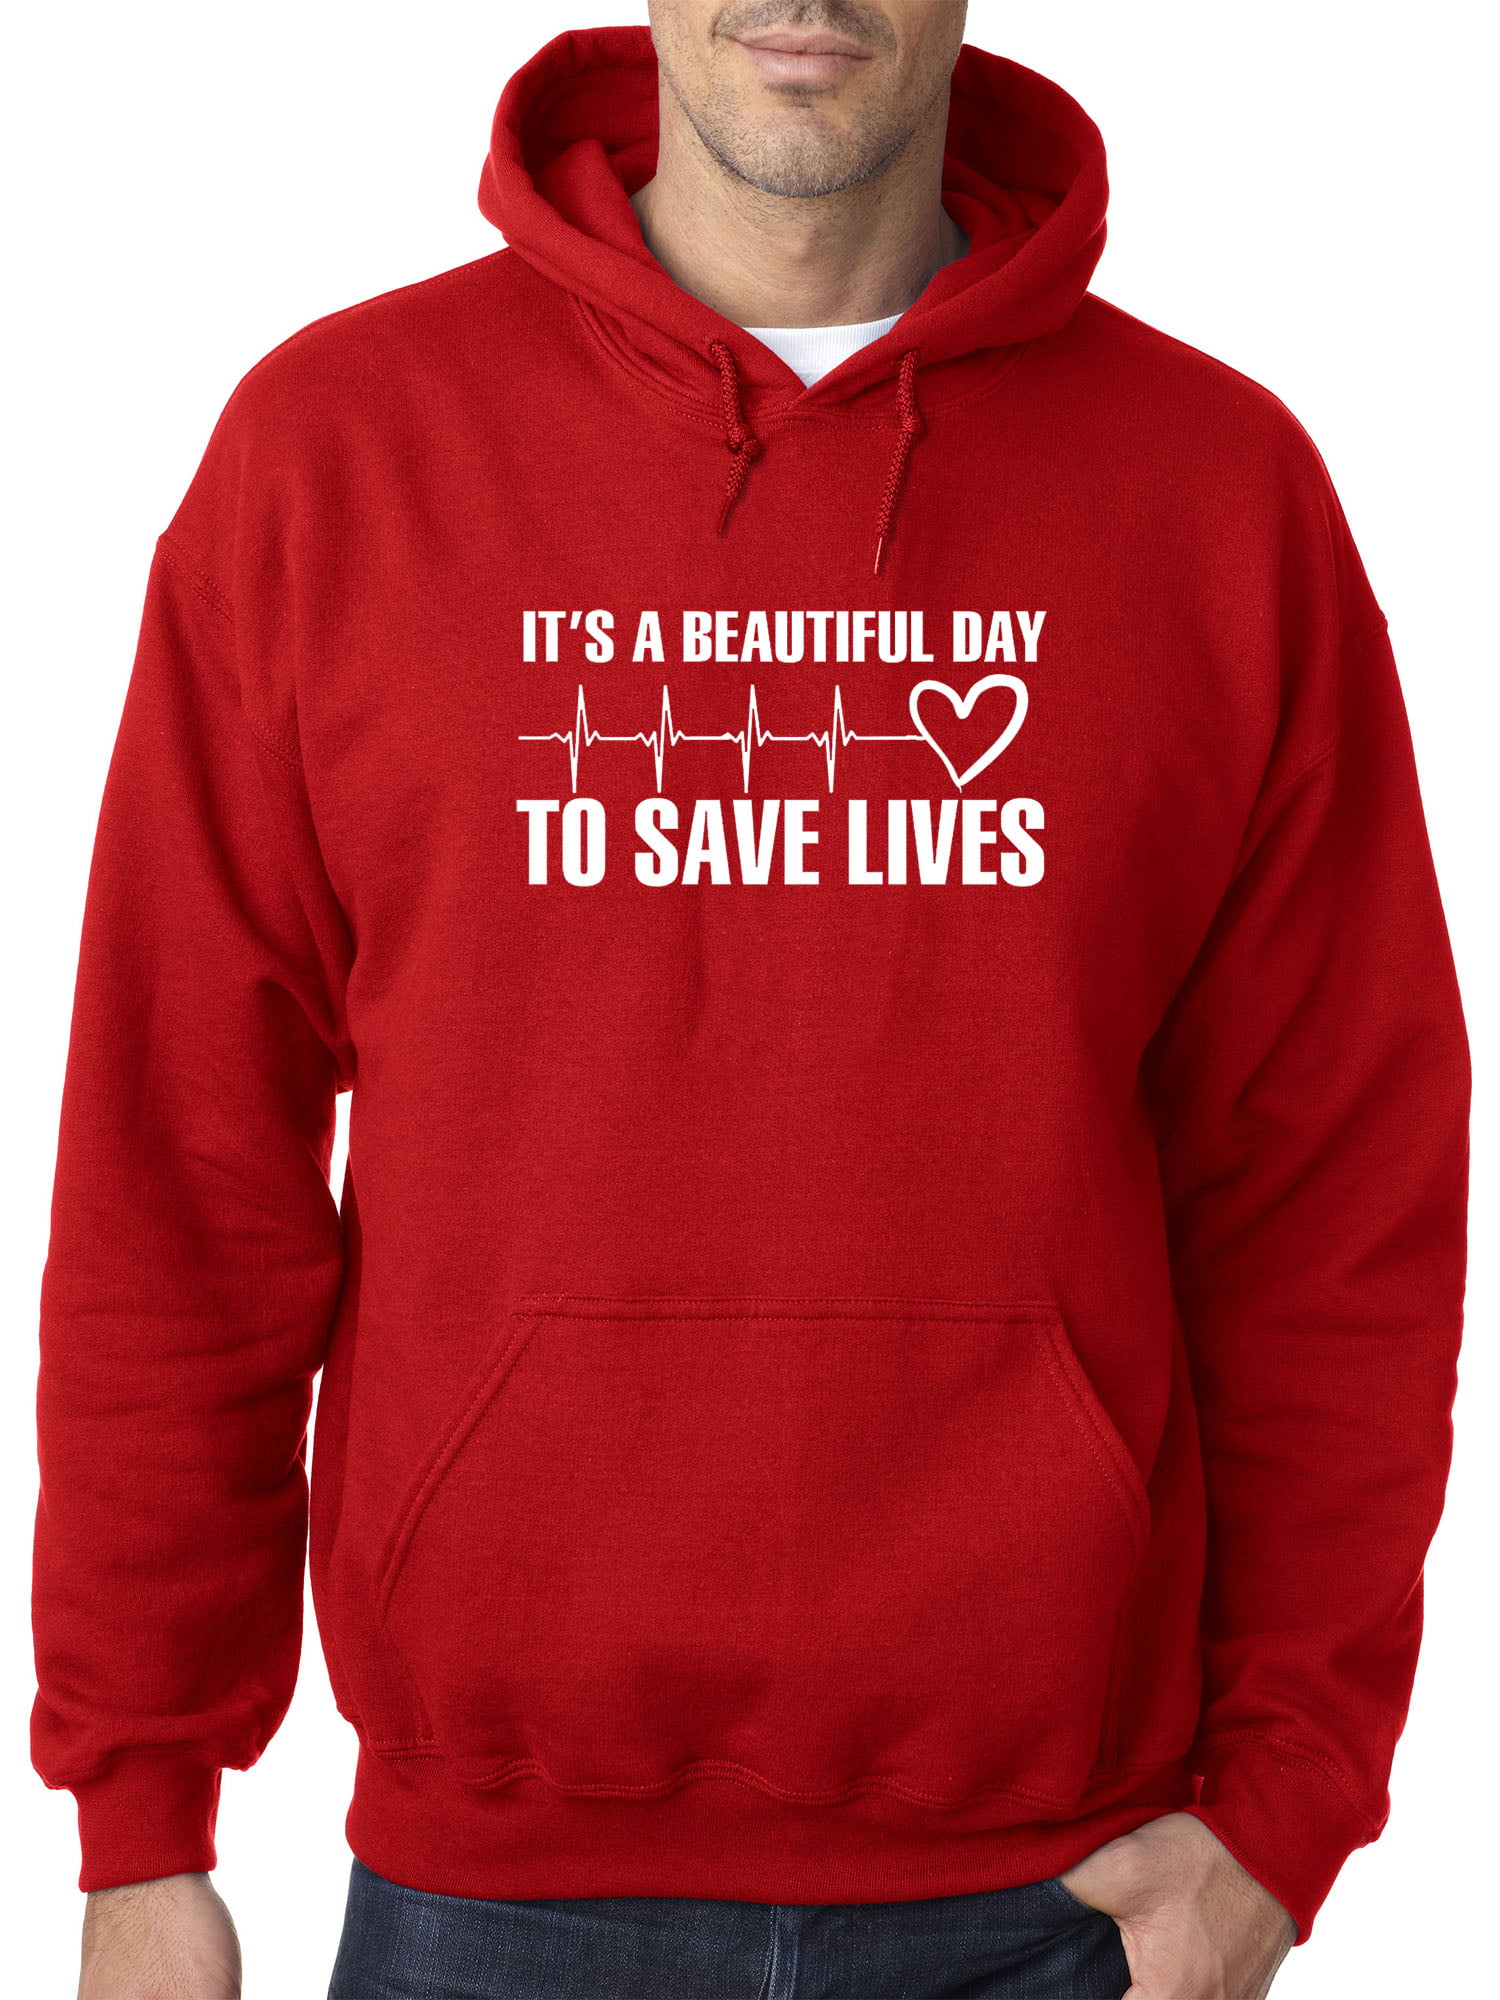 It\u2019s a beautiful day to save lives bleached hoodie Handmade graphic doctor show top